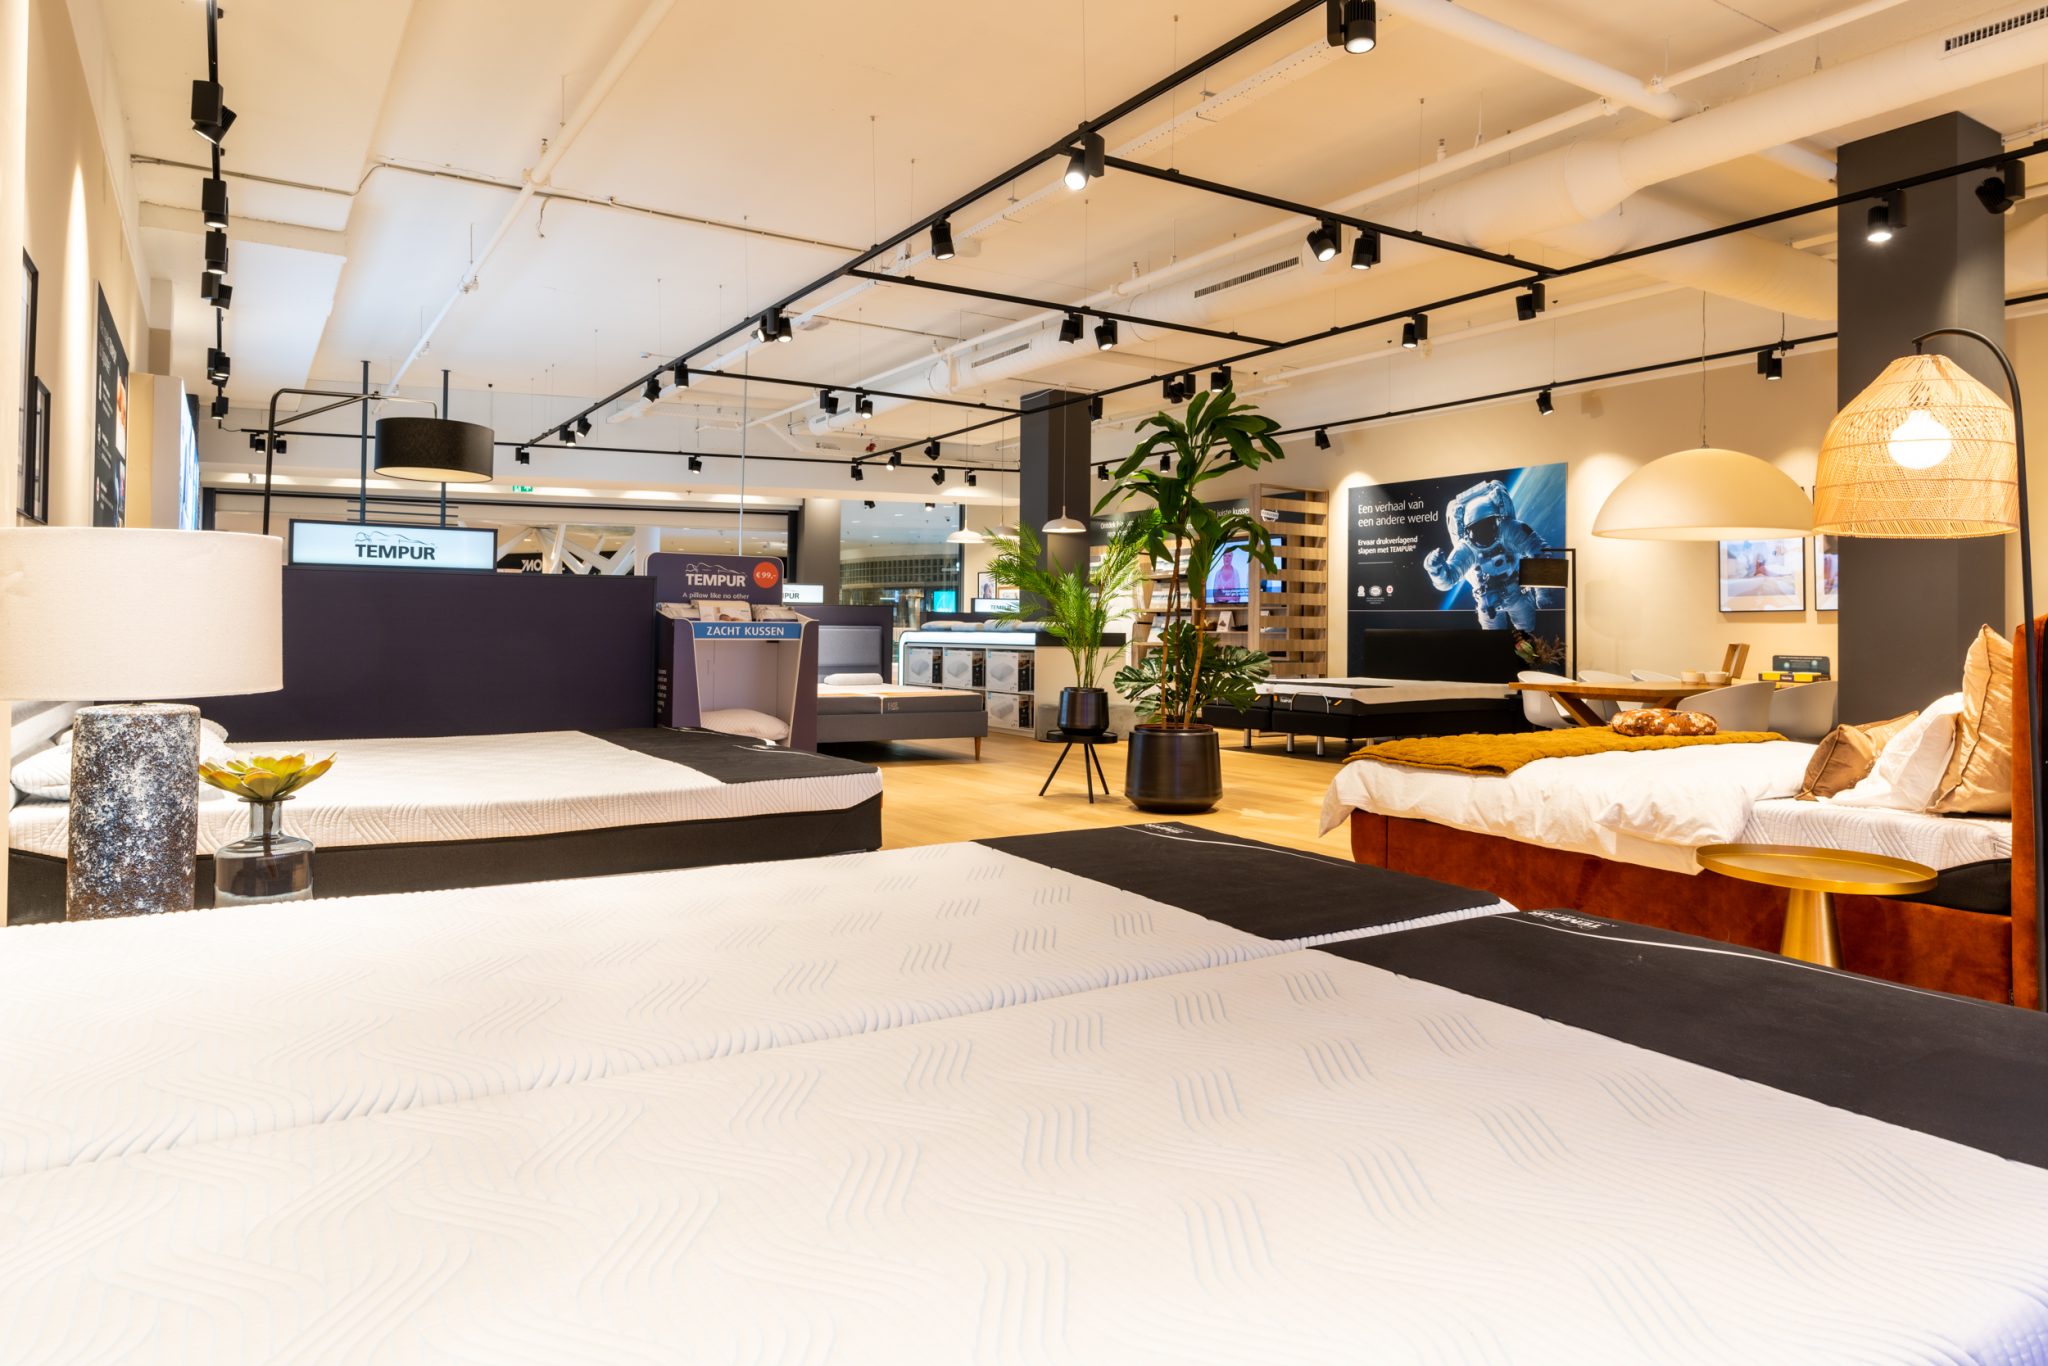 tempur rotterdam by the image partner (39)